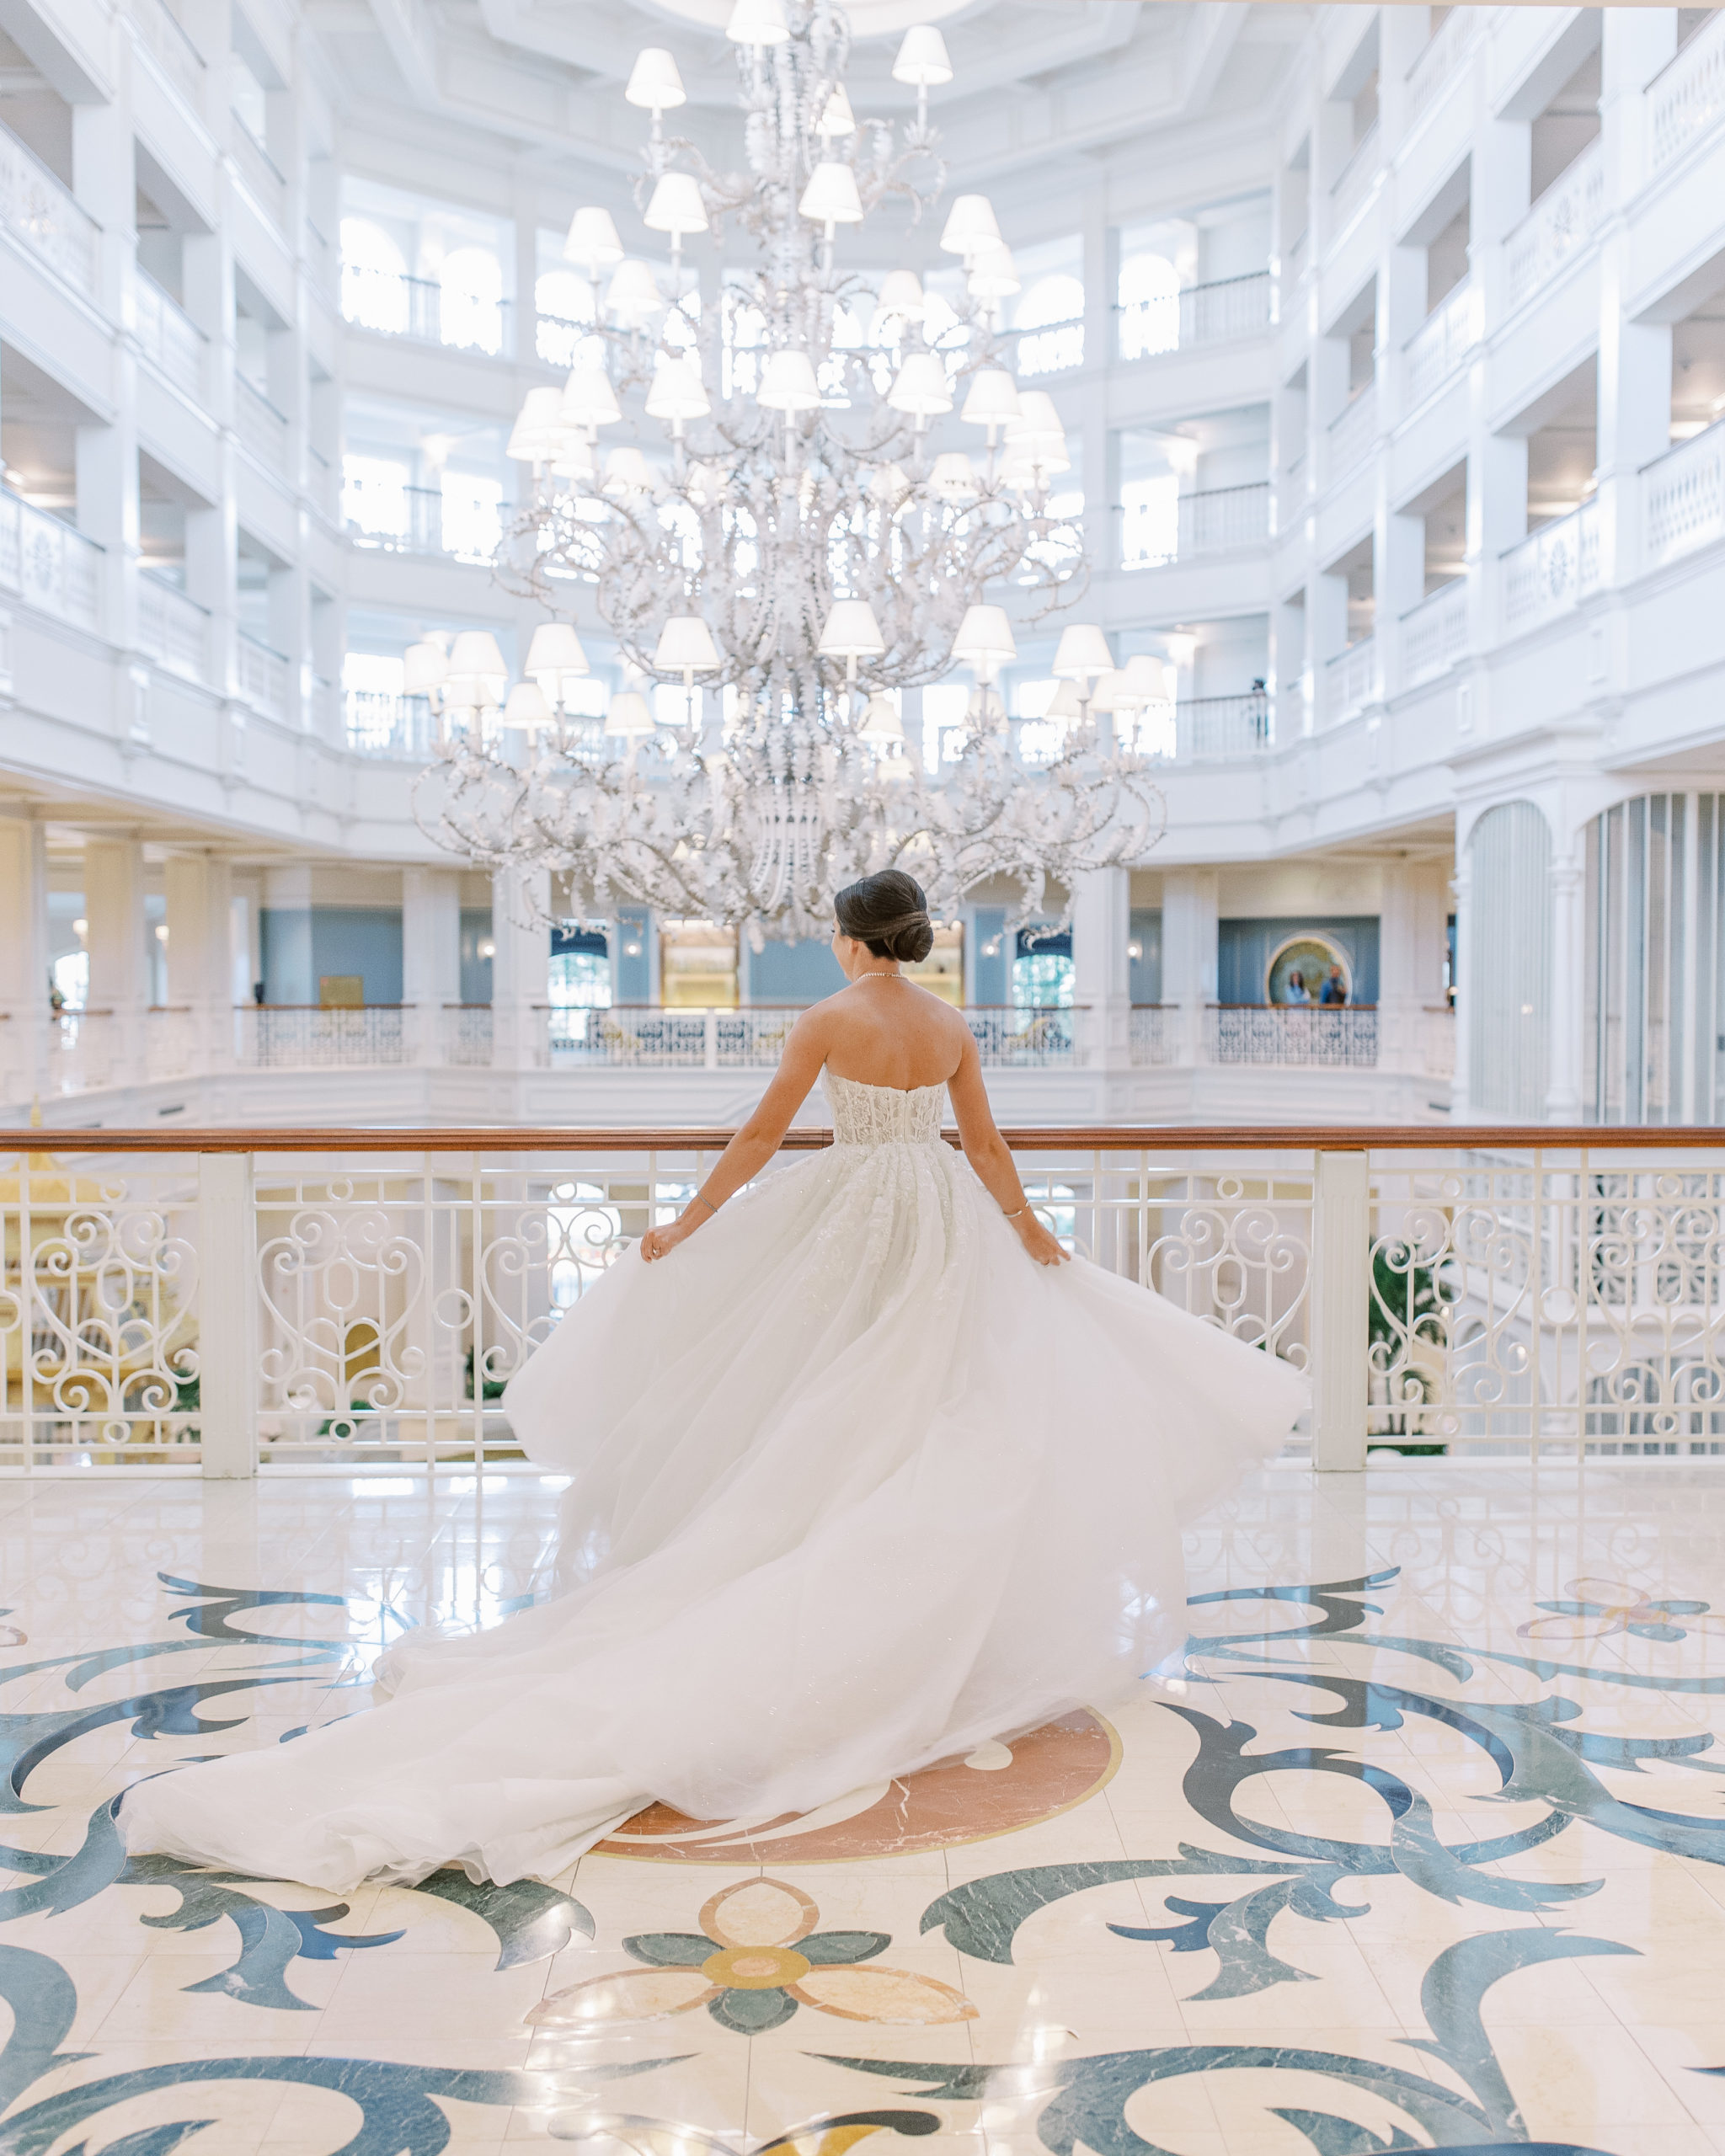 Bride spins her dress with large chandelier and balconies in the background at Disney's Resort for a Romantic and Timeless Grand Floridian Wedding   